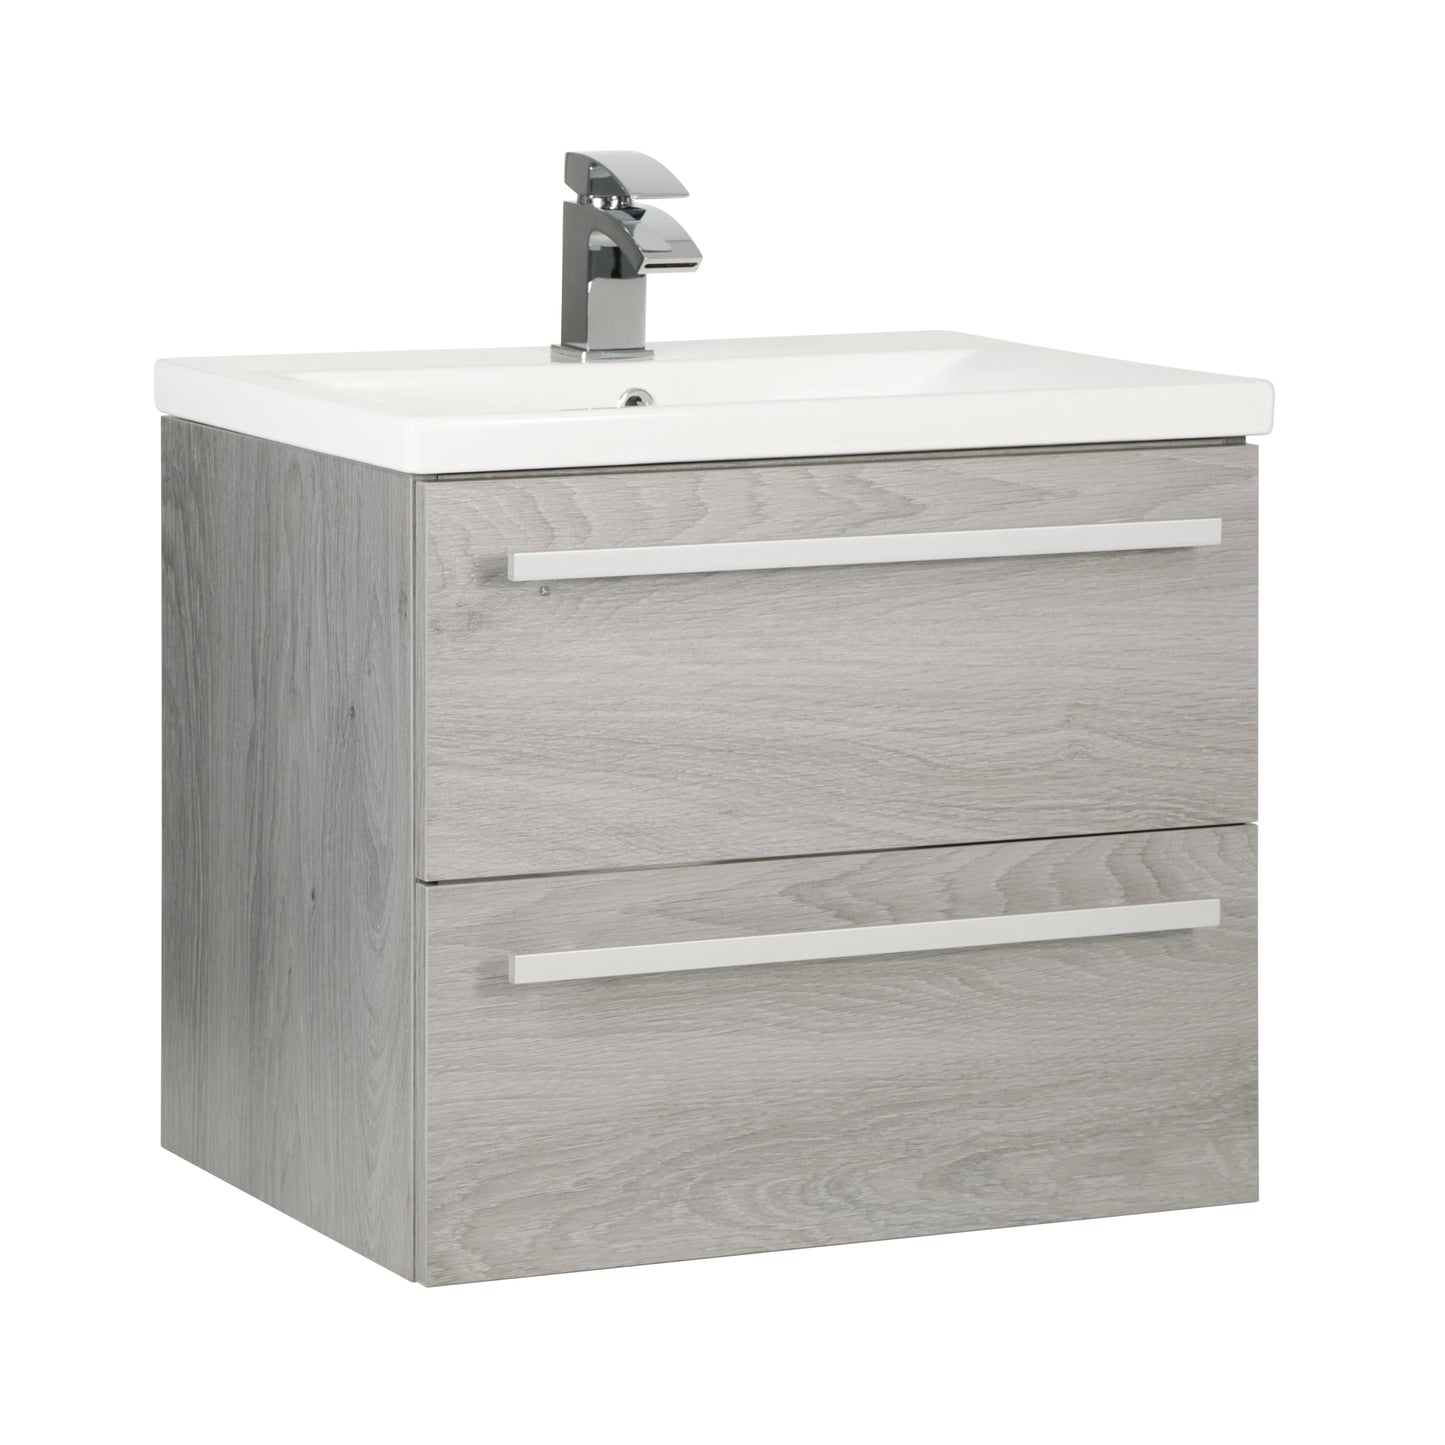 Purity Kartell Wall Mounted Two Drawer 600mm Basin Sink Vanity Unit